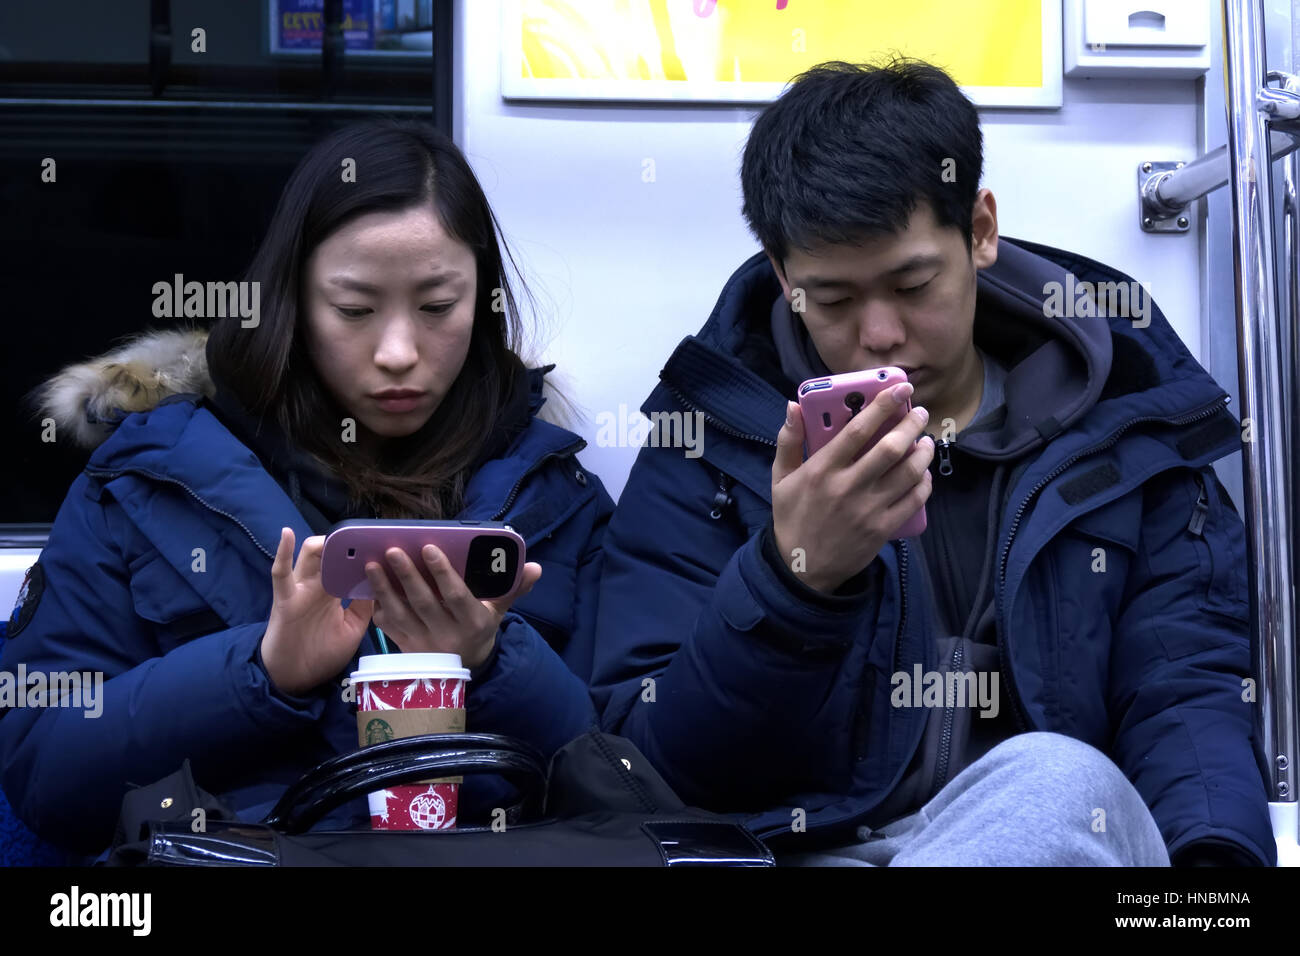 Asian people, young man and woman, Korean youth with mobile phone, traveling on subway train. Seoul, South Korea, Asia Stock Photo